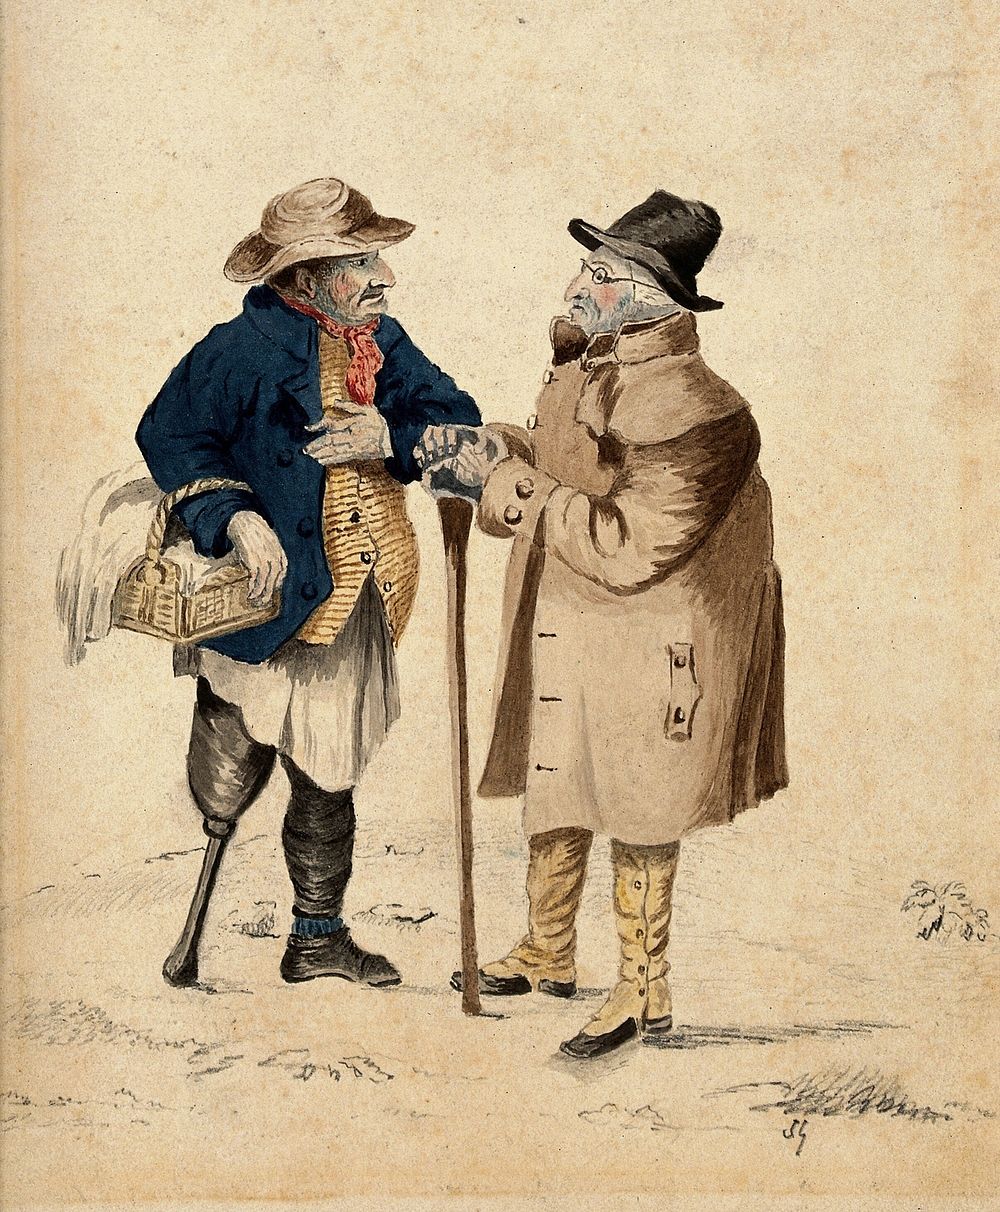 Two old men in conversation: the man on the left holding a basket has a wooden leg, the other one leans with both hands on a…